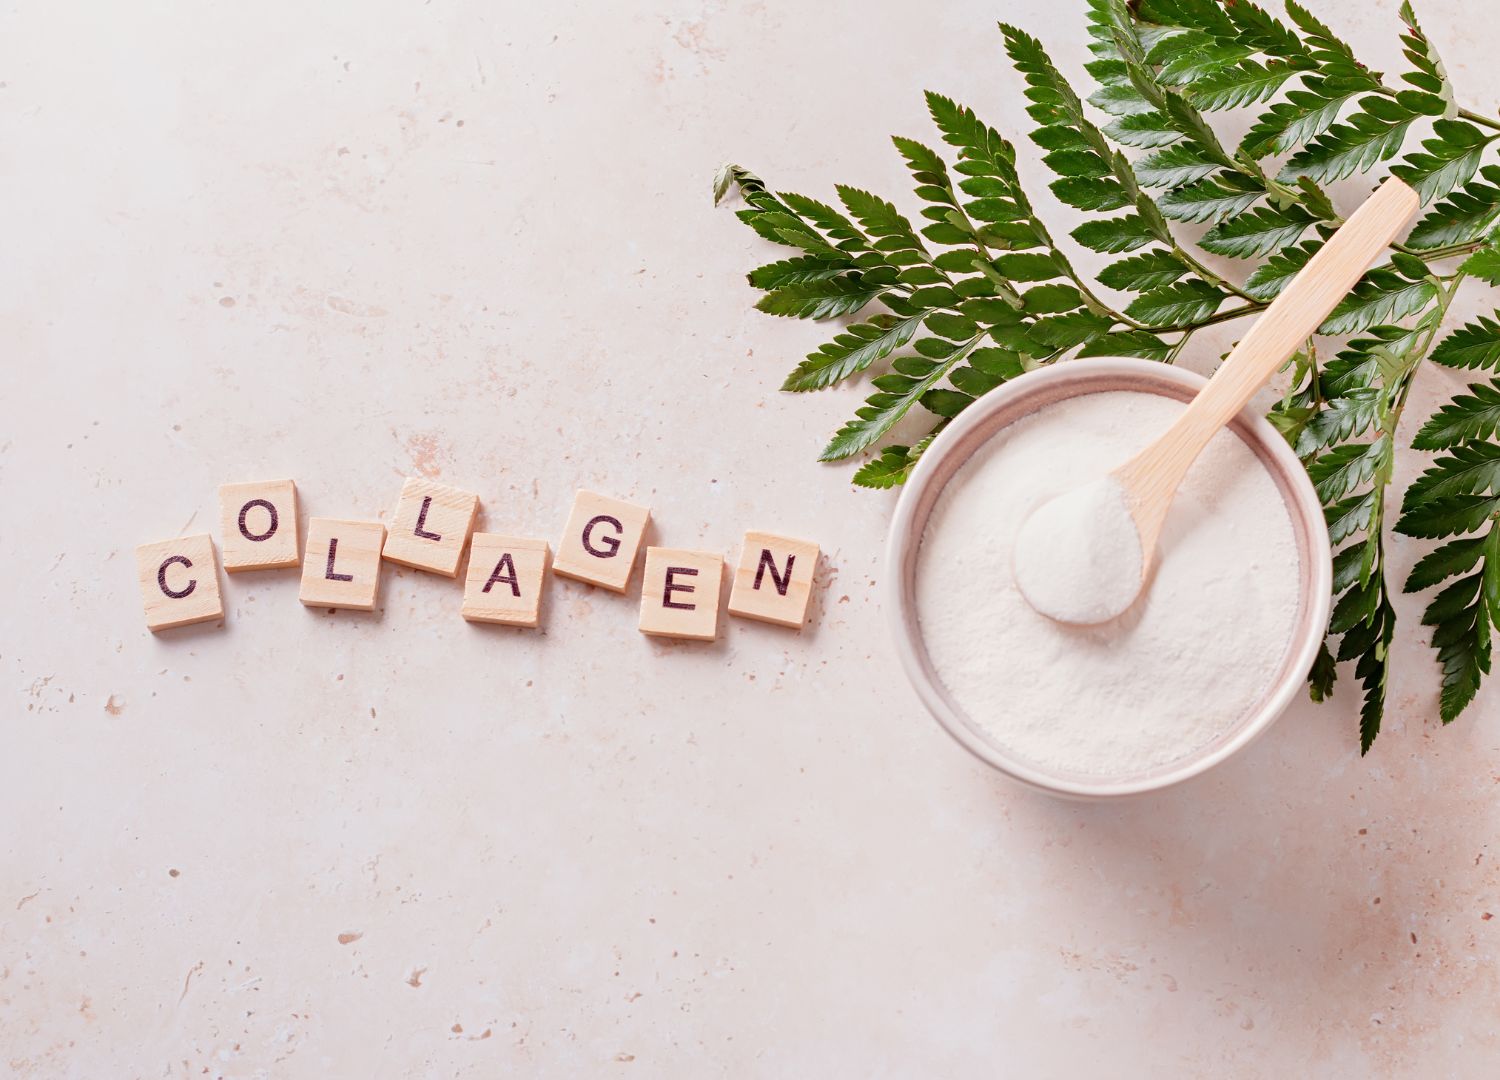 Importance of collagen that keeps our skin youthful